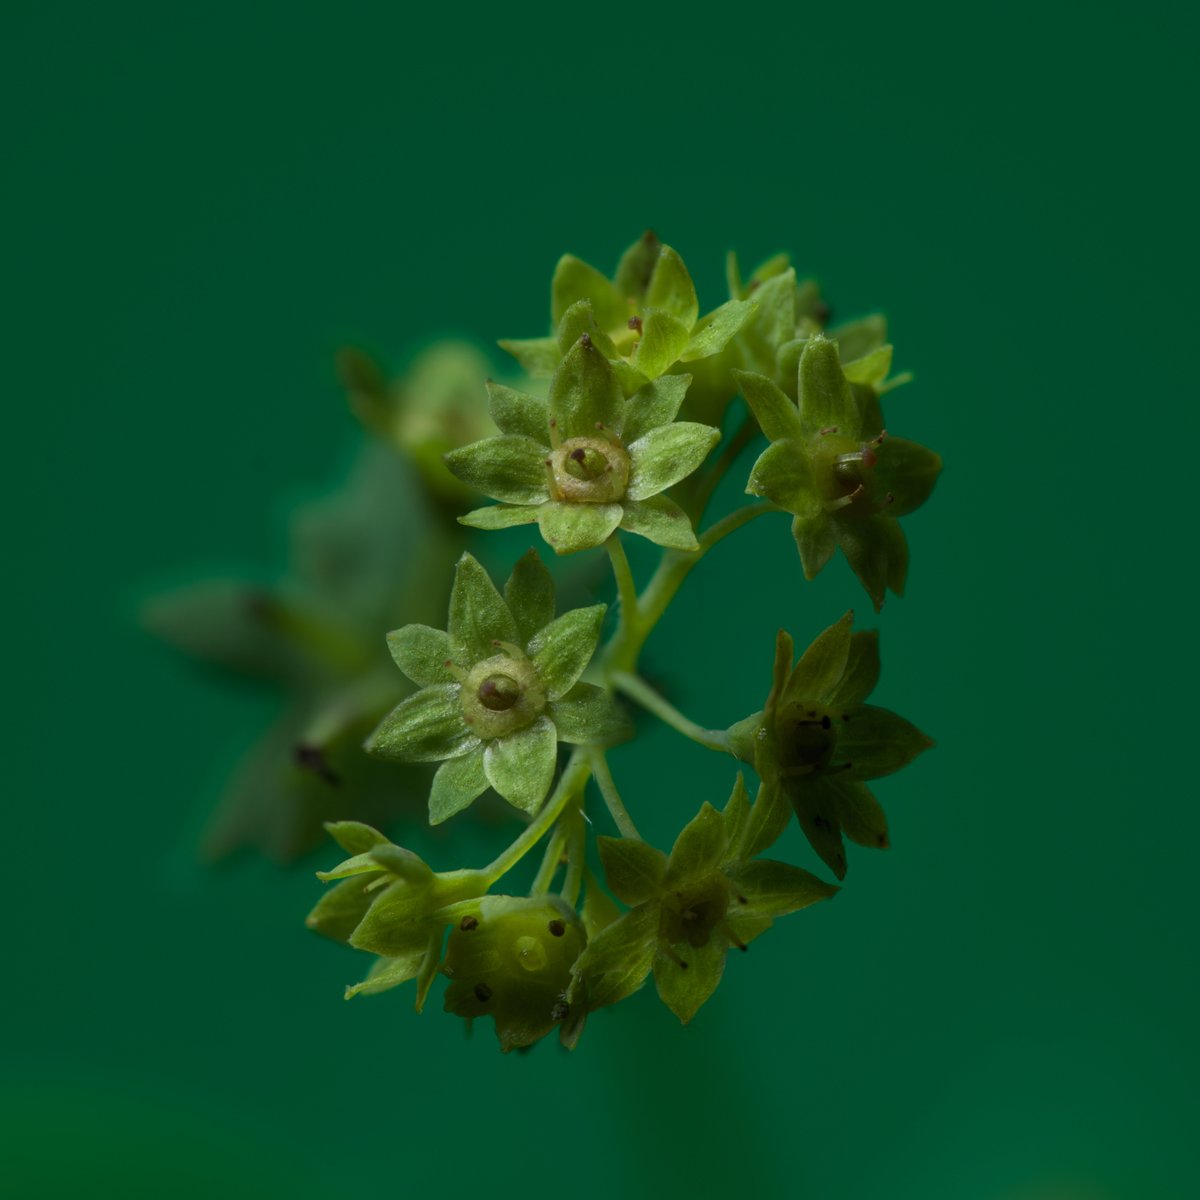 Flower photo of the day. Another tiny (5mm across) one; Hairy Lady's Mantle. I'm not sure though if it's the mantle that's hairy, or the lady. #macro #flowers #bloemenfotografie #flowersandmacro #bloemen #blumen #fleurs #raw_flowers #snap_flowers